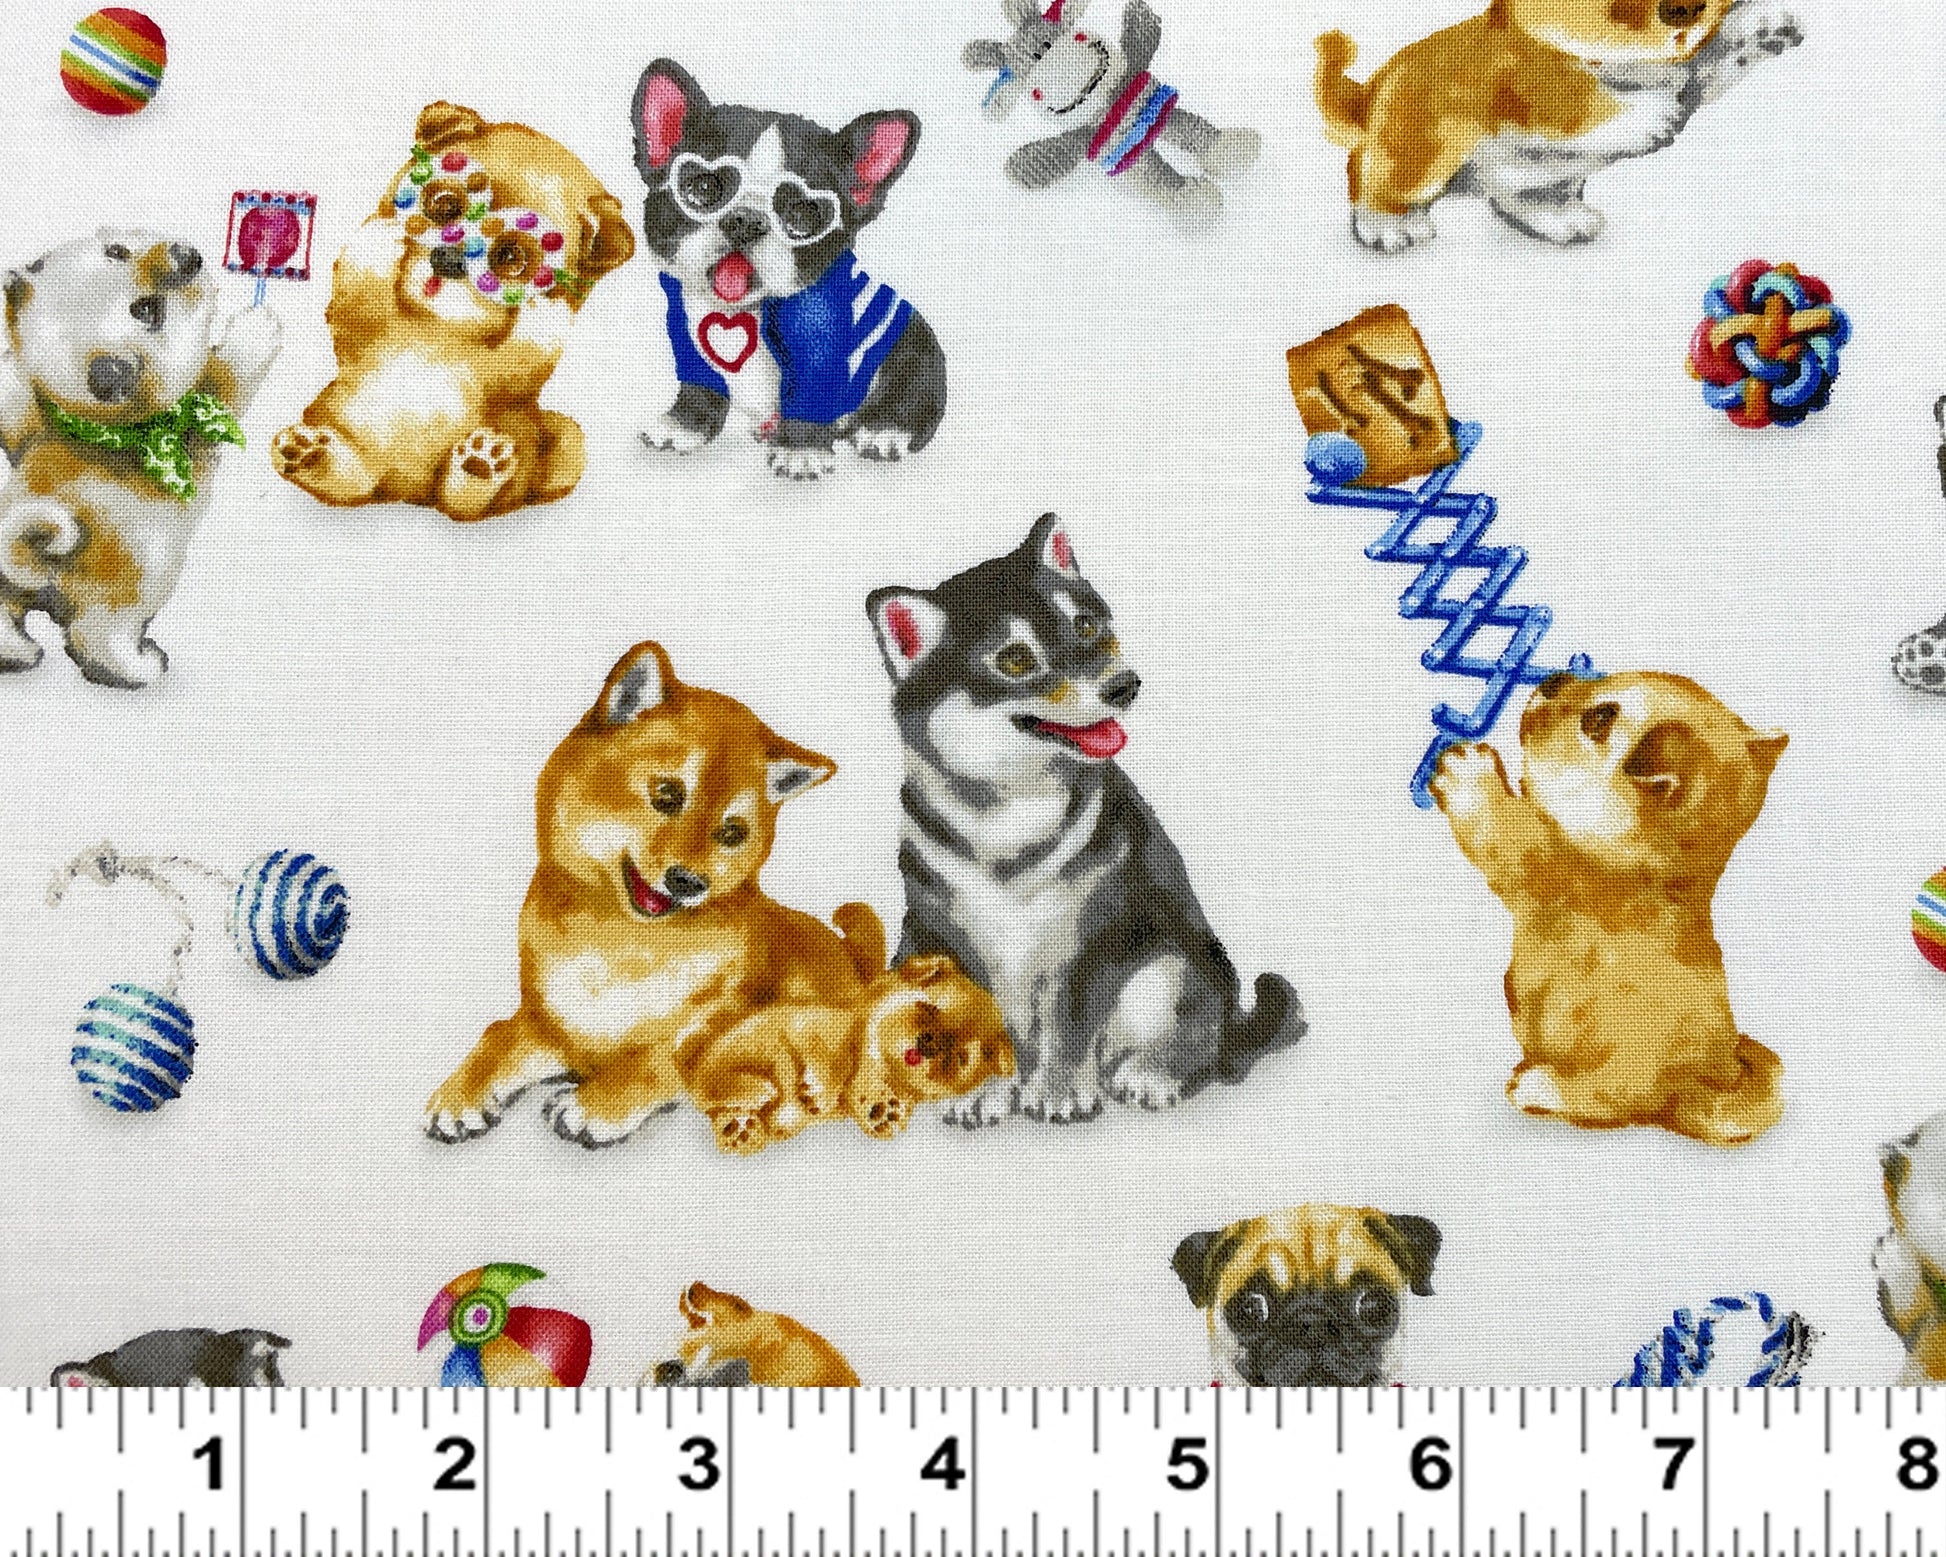 Dog fabric by the yard - Dog's Playing - Trendy Pups Collection from StudioE - 100% Cotton - Dog material Shiba Frenchie Pug -Ships NEXT DAY